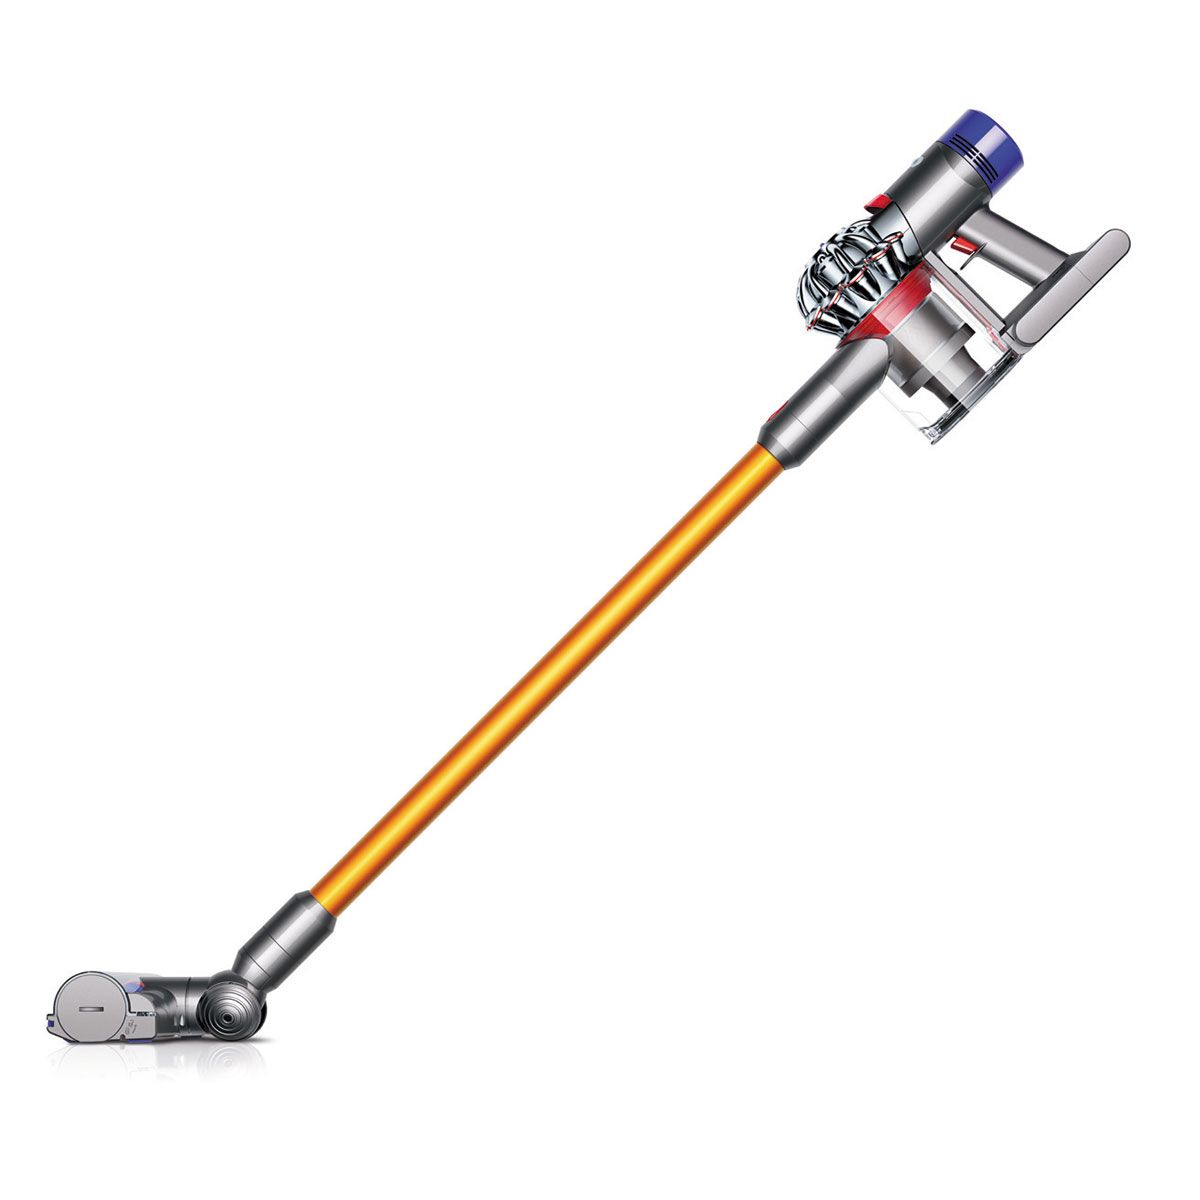 Dyson V8 Absolute Vacuum review